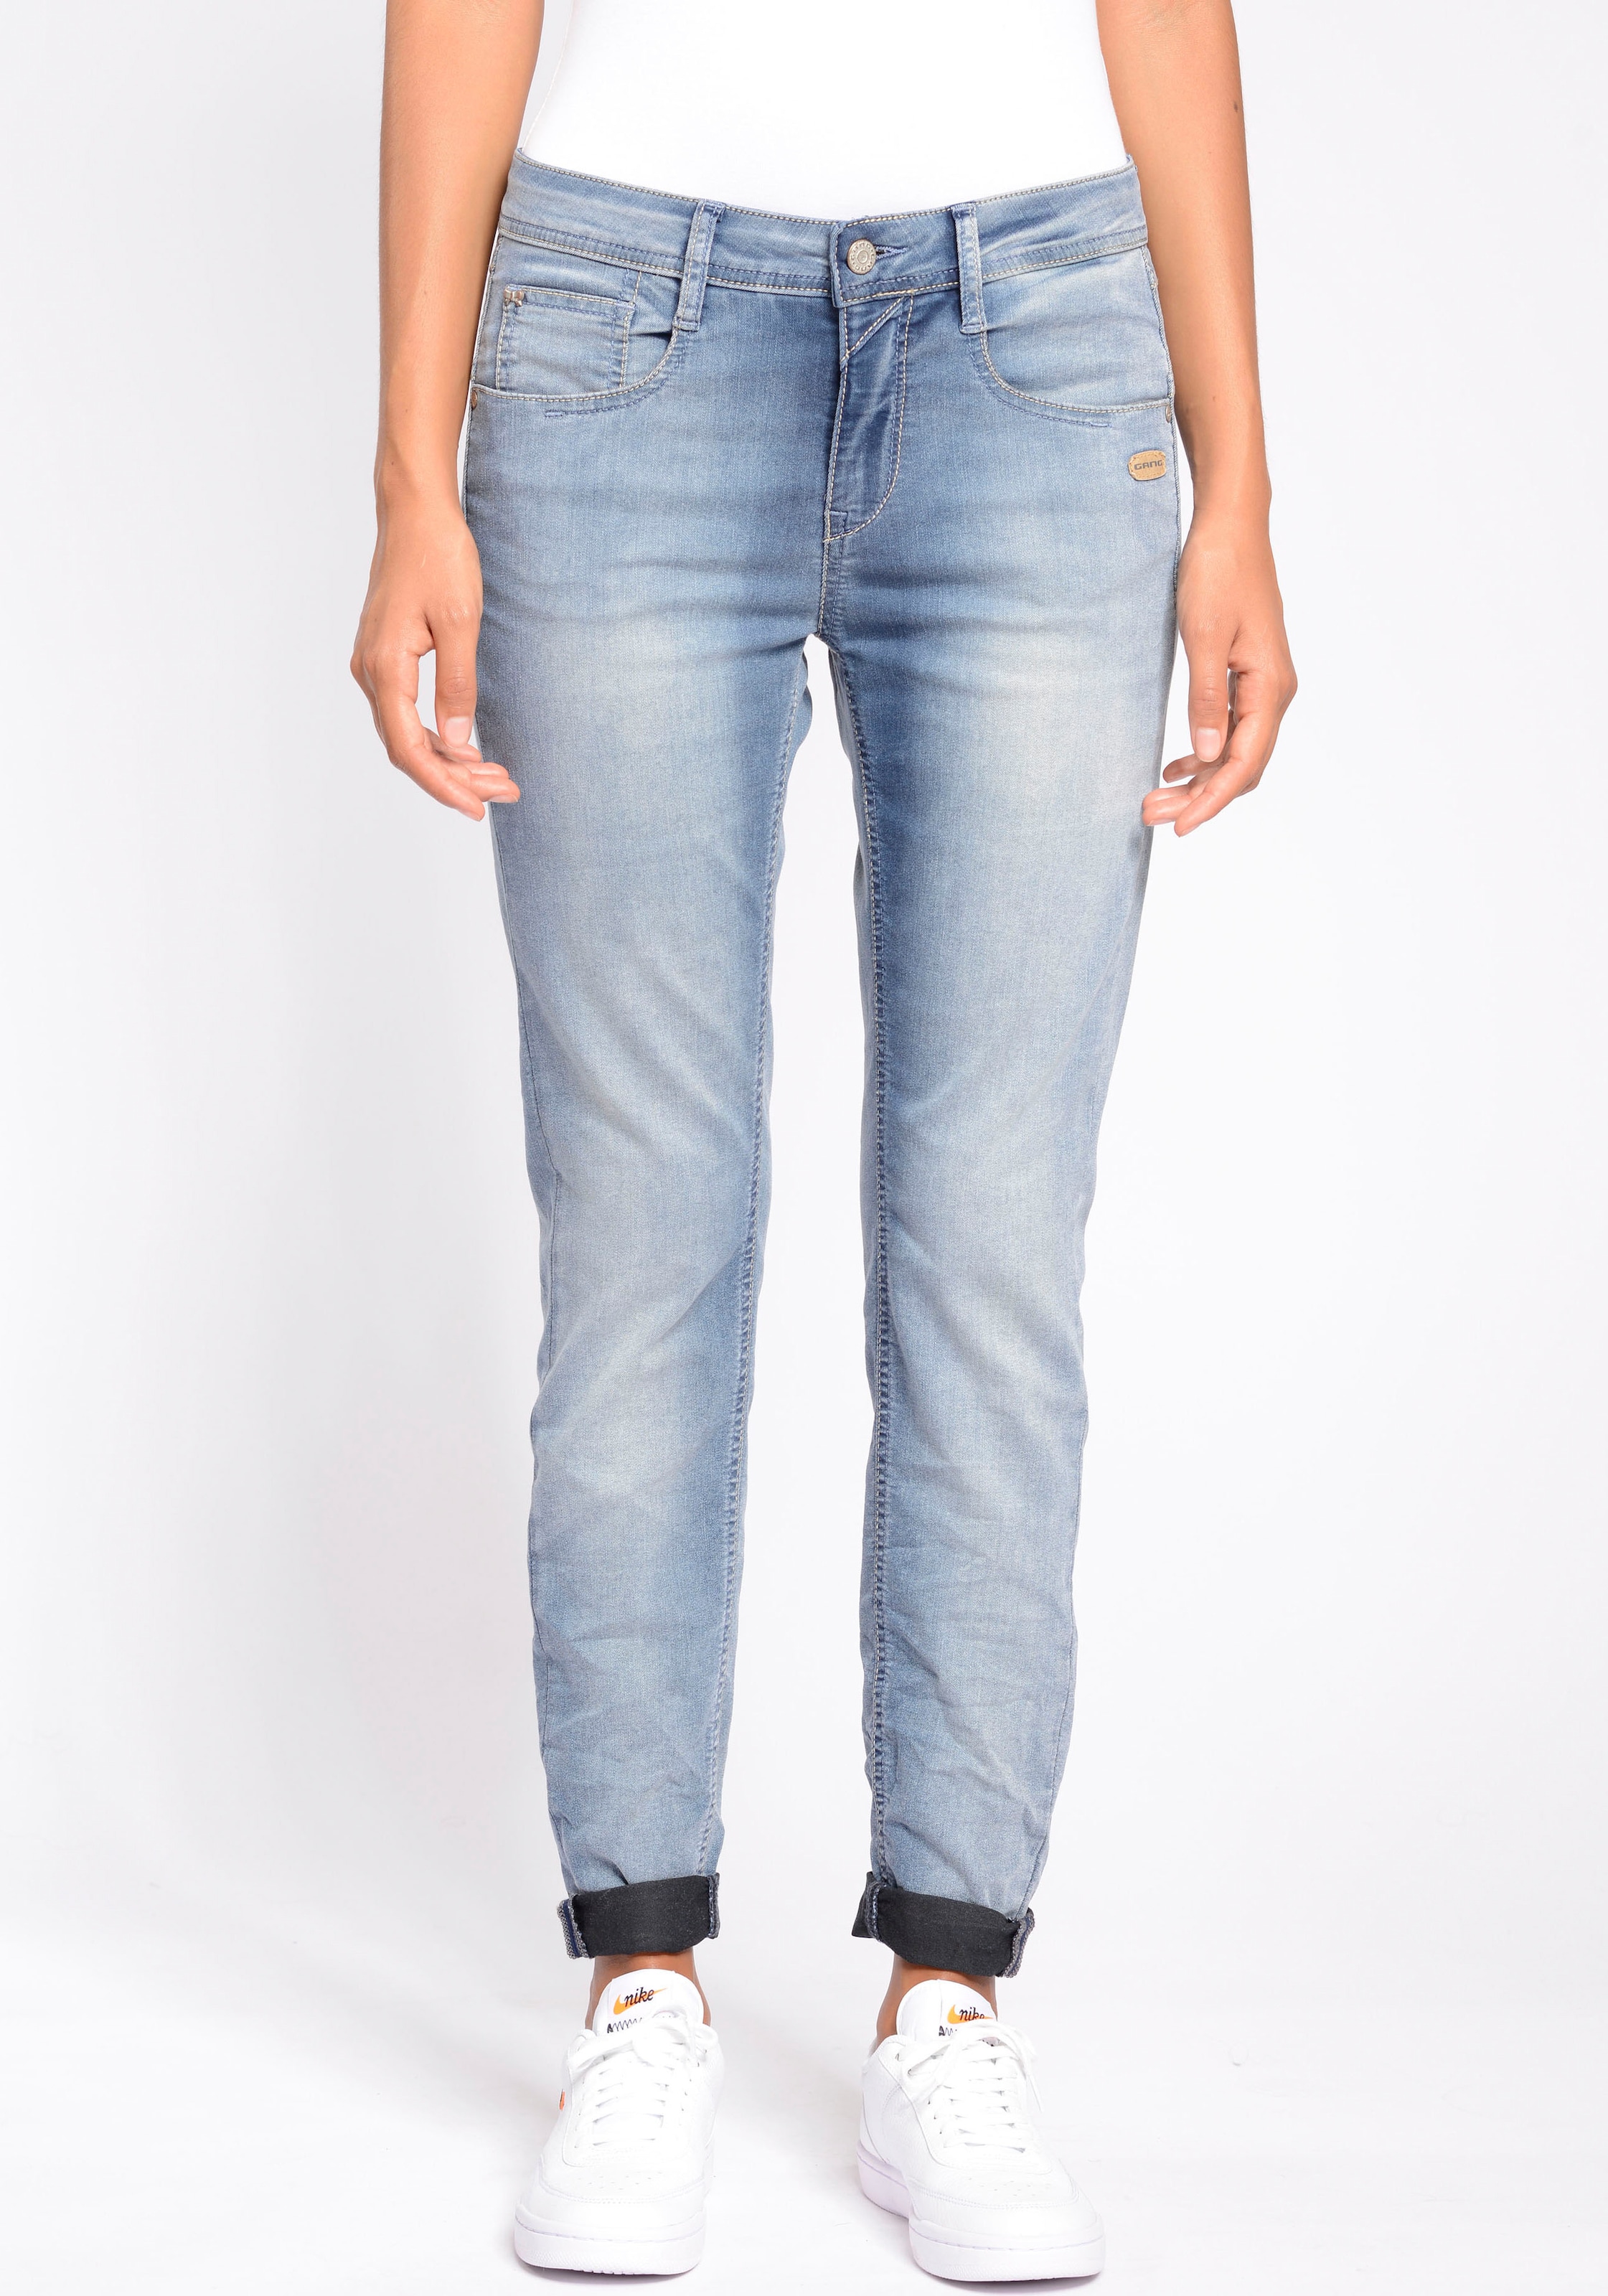 Waschung GANG ♕ Relax-fit-Jeans auf in »94Amelie«, versandkostenfrei Used cooler